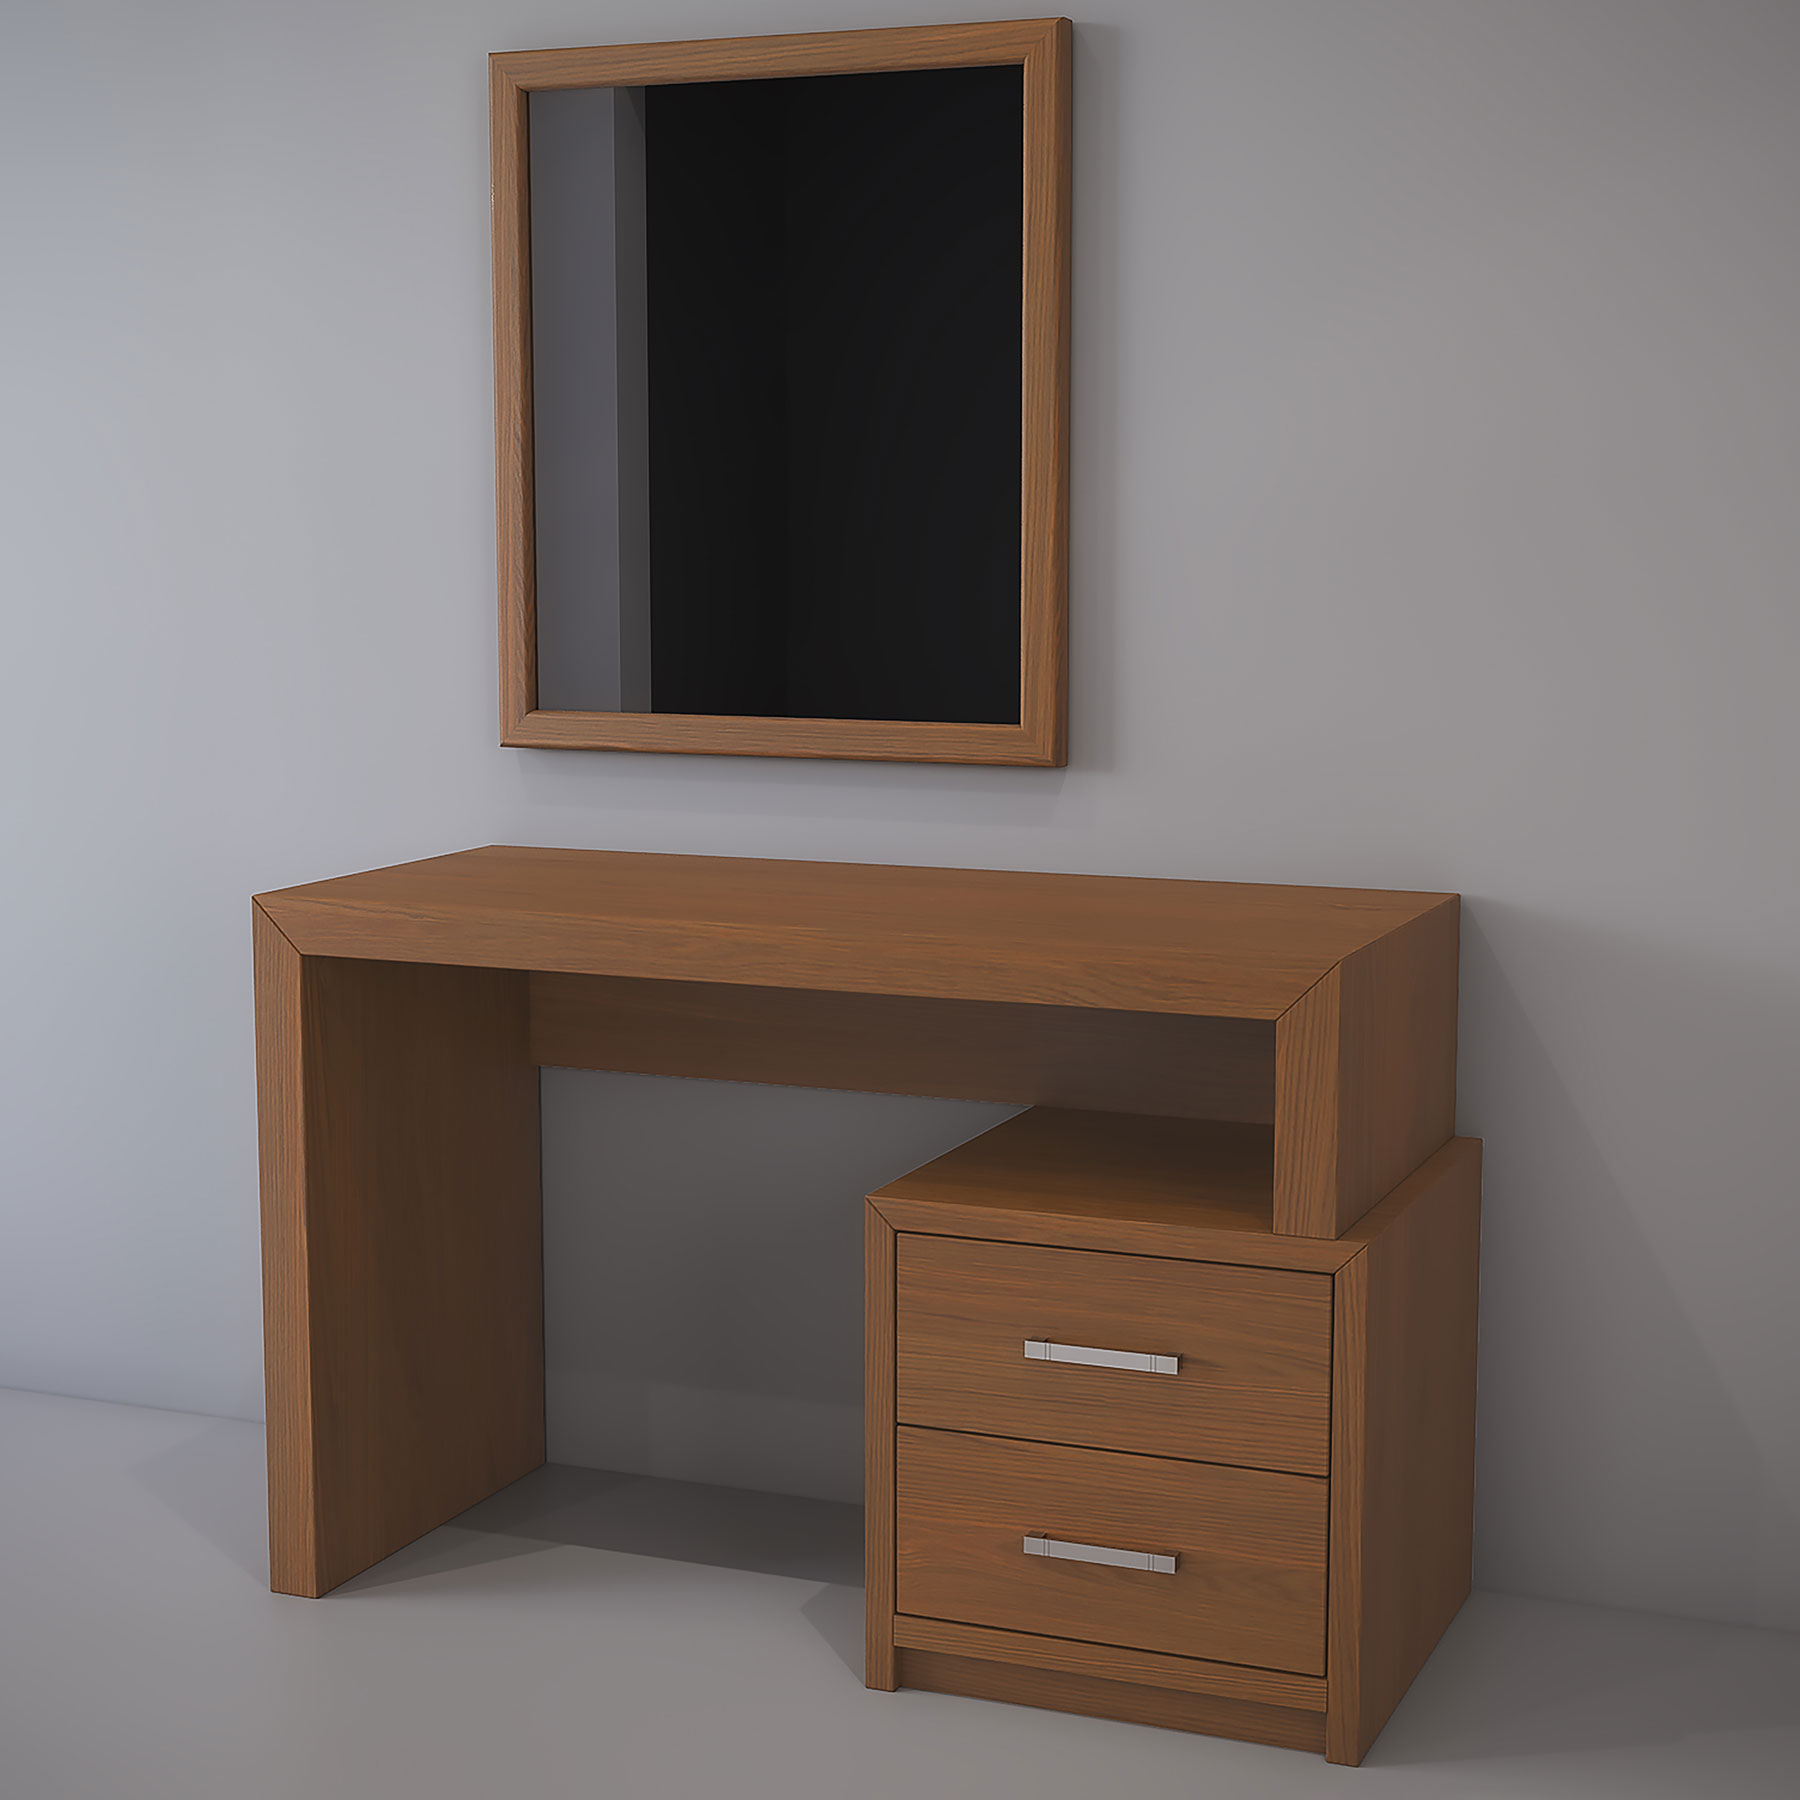 Verona dressing table and mirror